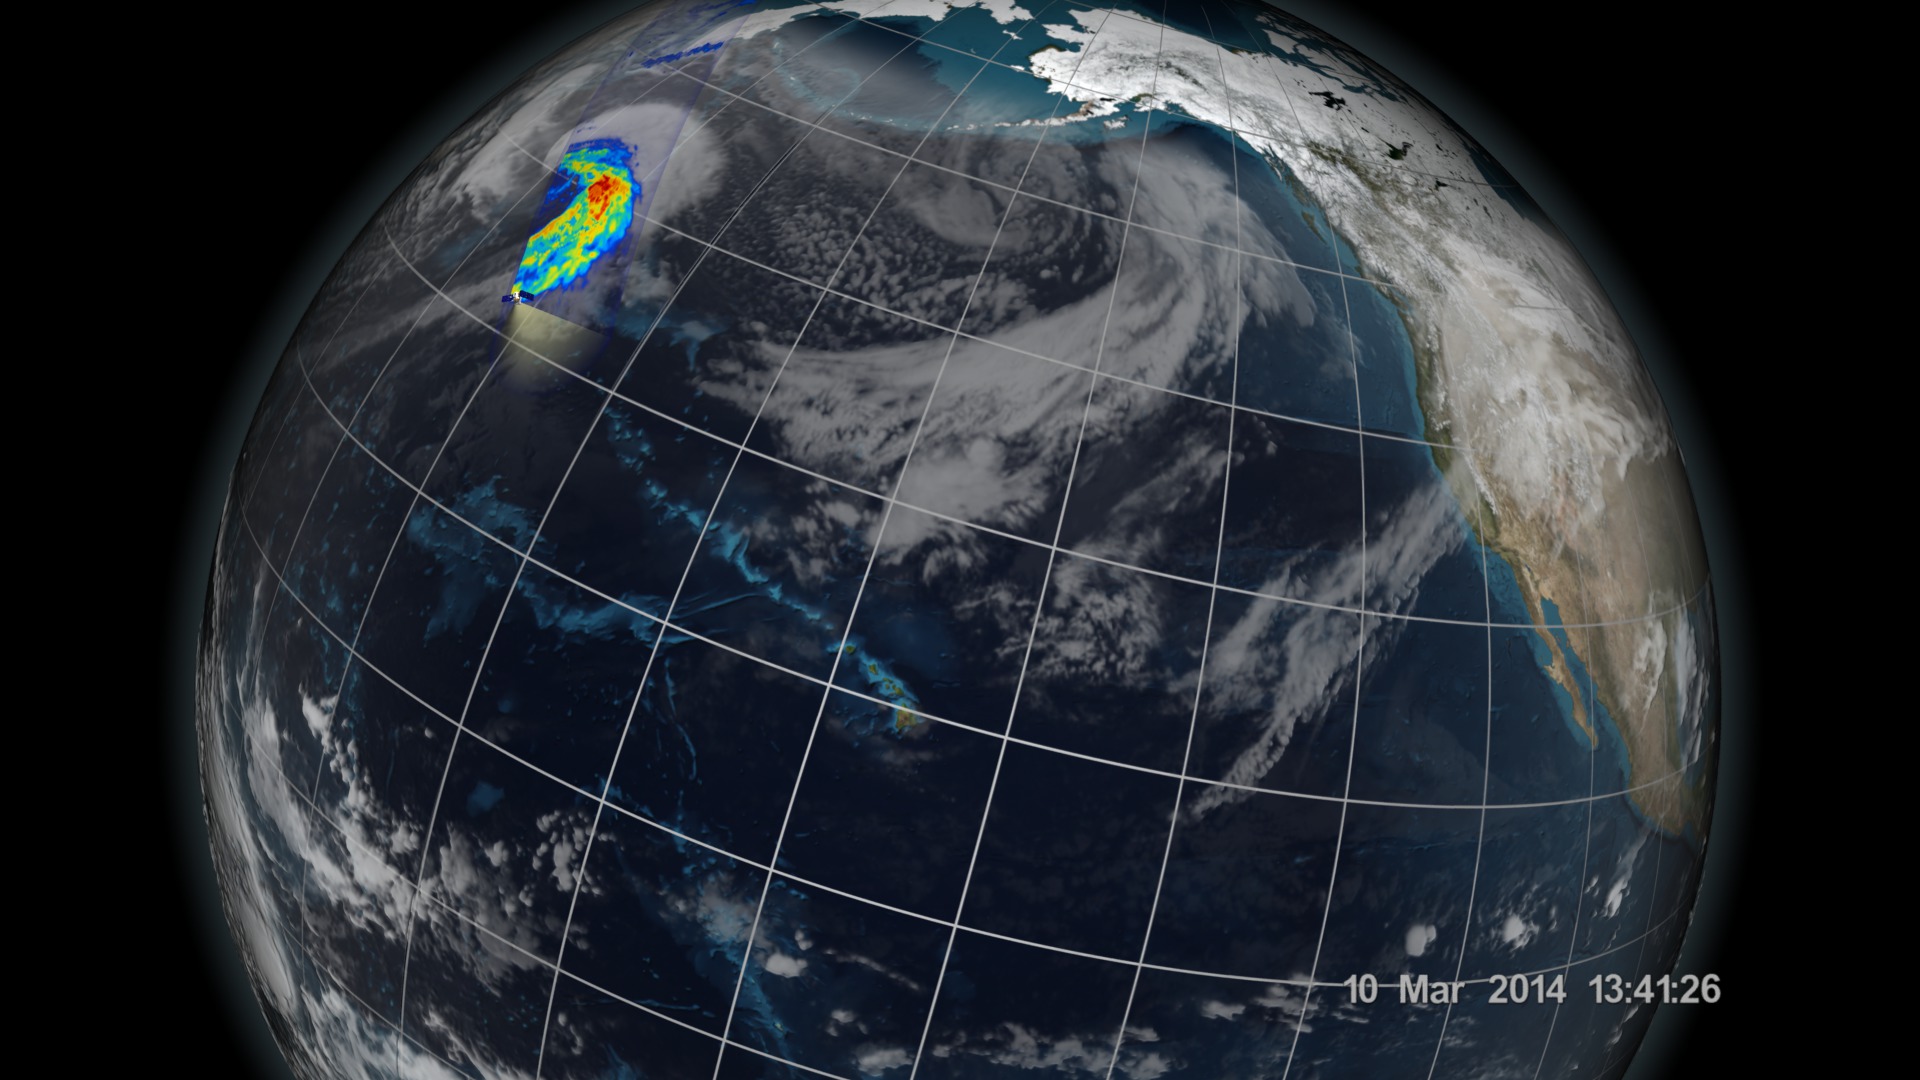 This animation shows GPM collecting some of it's very first data on March 10th over a Pacific storm east of Japan. The animation begins with GPM collecting 37 GHz horizontally polarized brightness temperature data over the storm (in shades of aquamarine).  All of GPM's 13 bands are then spread out to reveal the entire range of brightness temperature data. This data then collapses into rain rates for this storm, which are colored in a rainbow spectrum going from blue (low values) to dark red (high values). As the camera pulls out, GPM continues traversing the globe showing rain rates for the remainder of the swath.